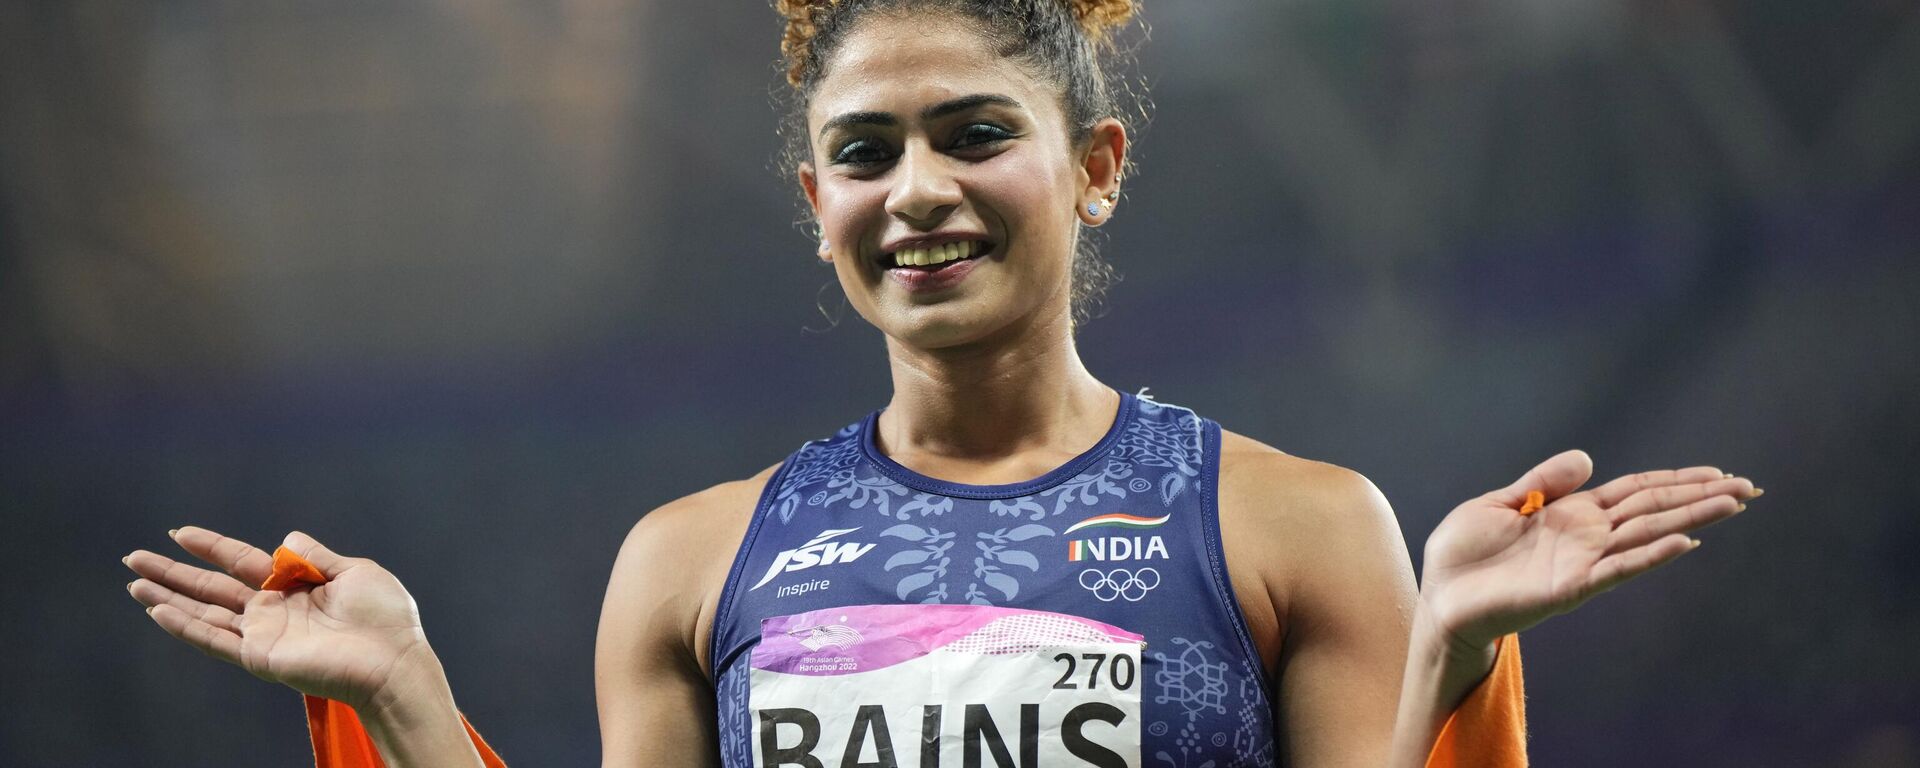 India's Harmilan Bains celebrates her second place finish to win the silver medal in the women's 800-meter final at the 19th Asian Games in Hangzhou, China, Wednesday, Oct. 4, 2023. - Sputnik India, 1920, 09.10.2023